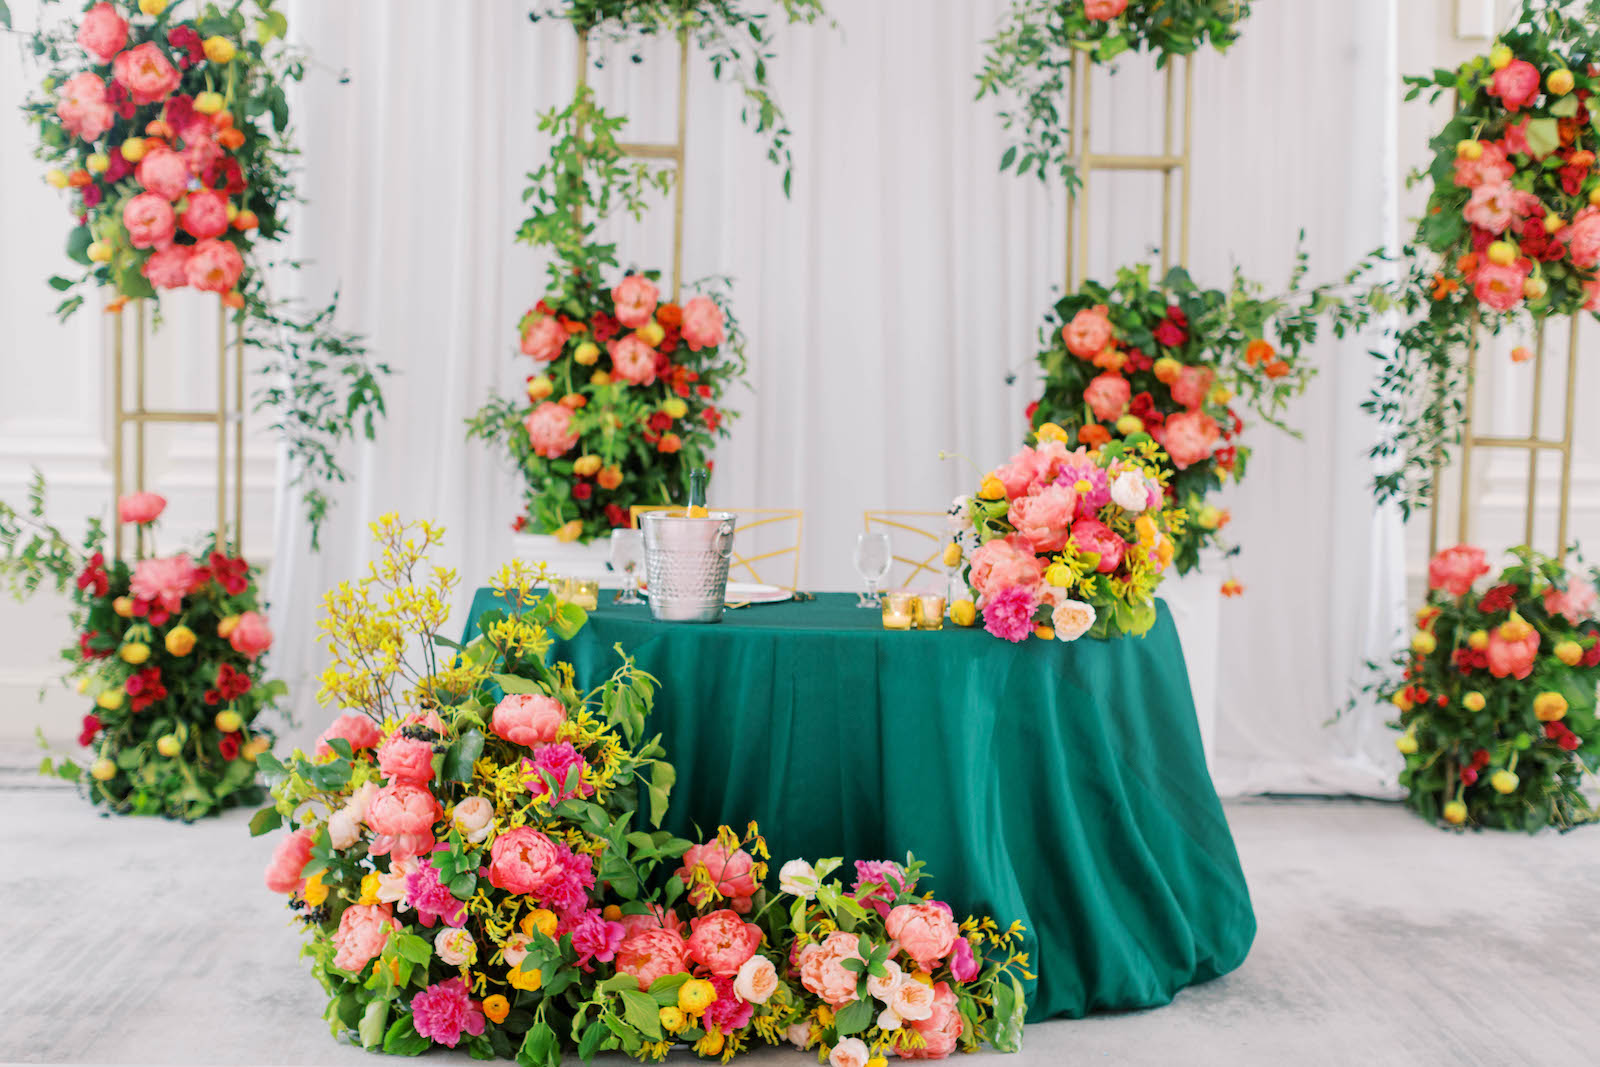 Greenery with Pink and Orange Floral Décor Pieces and Teal Green Sweetheart Table Reception Decor | St. Pete Wedding Planner Parties a la Carte